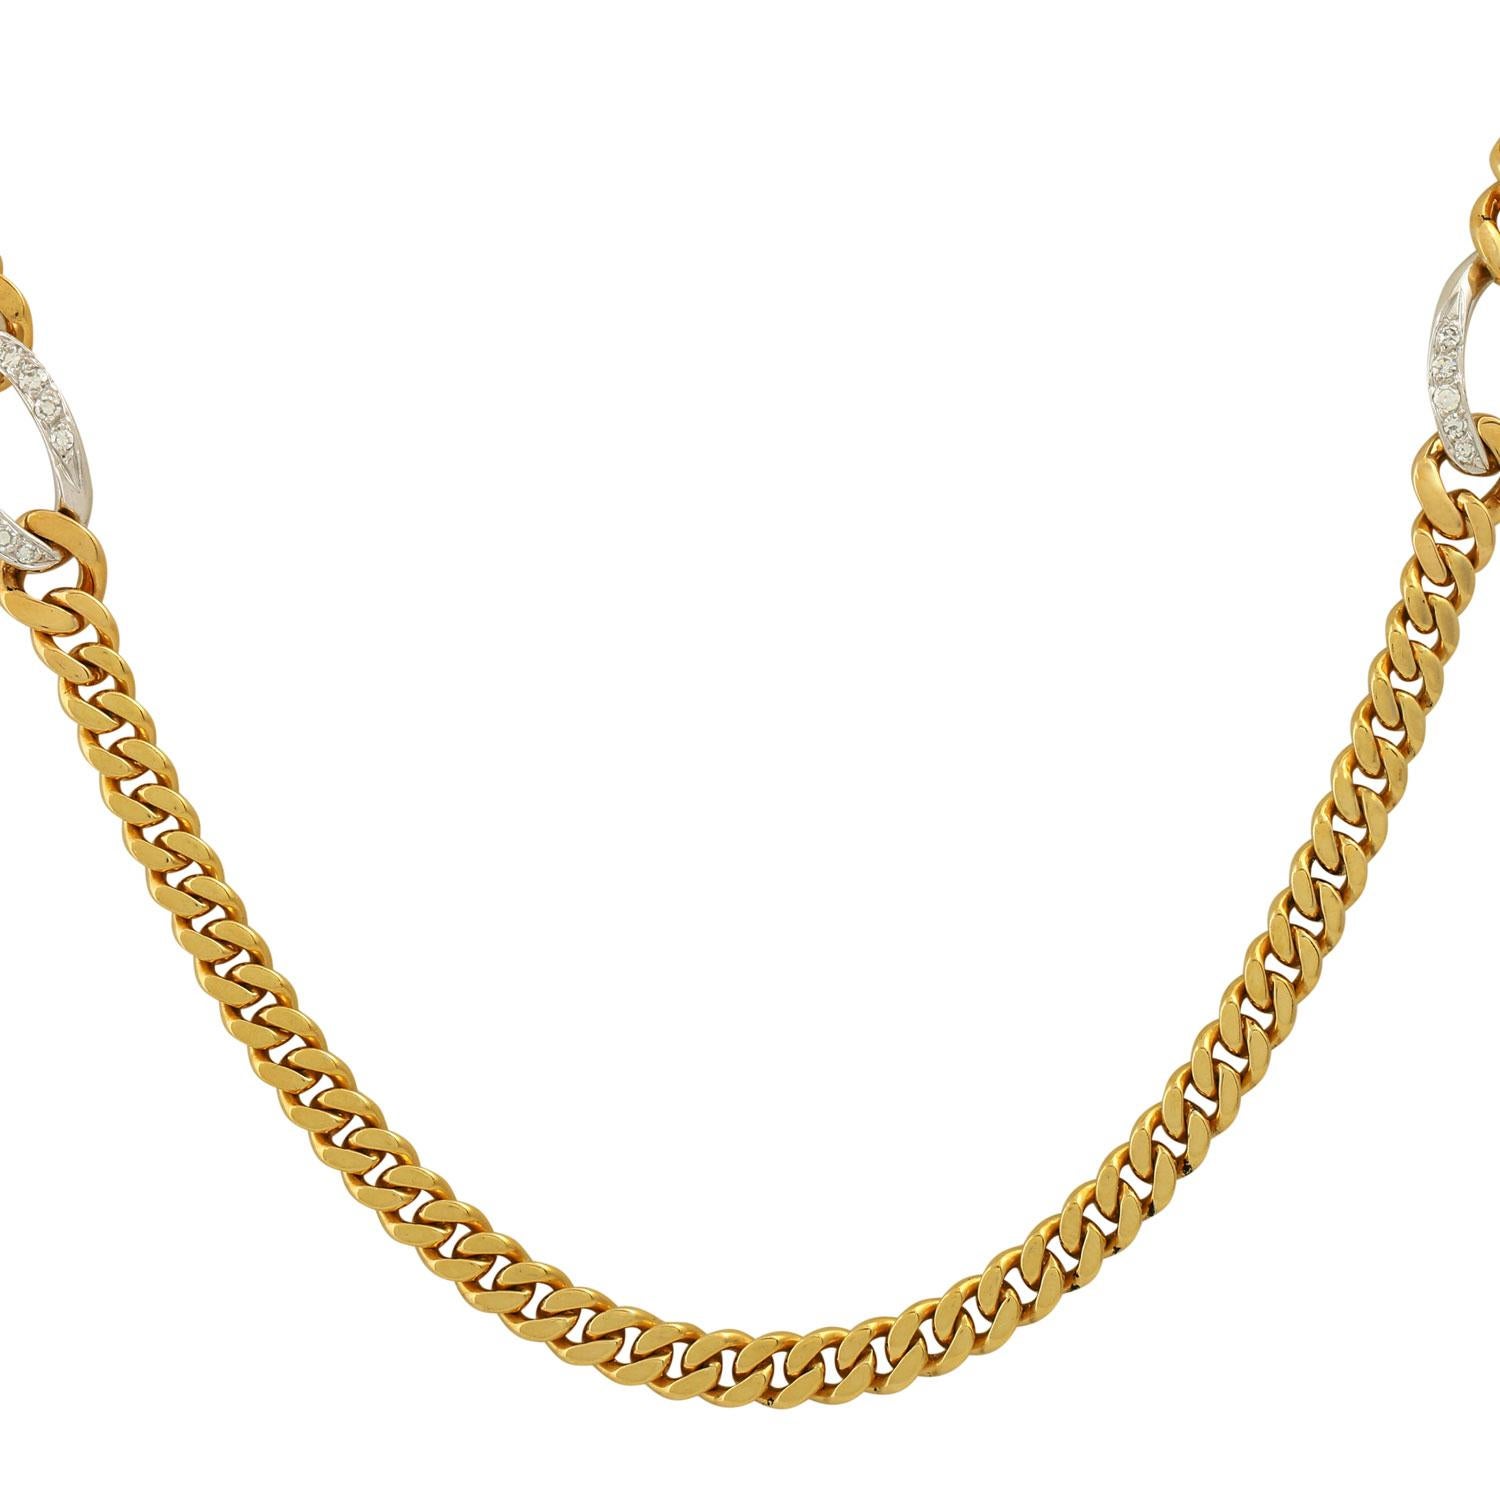 Curb chain with 40 octagonal diamonds of approx. 0.40 ct, good color and clarity, GG/WG 18K, 99 g, L: approx. 90 cm, 20th century, slight signs of wear.

Curb link necklace 40 with single -cut diamonds totaling approx. 0.40 ct, good color and